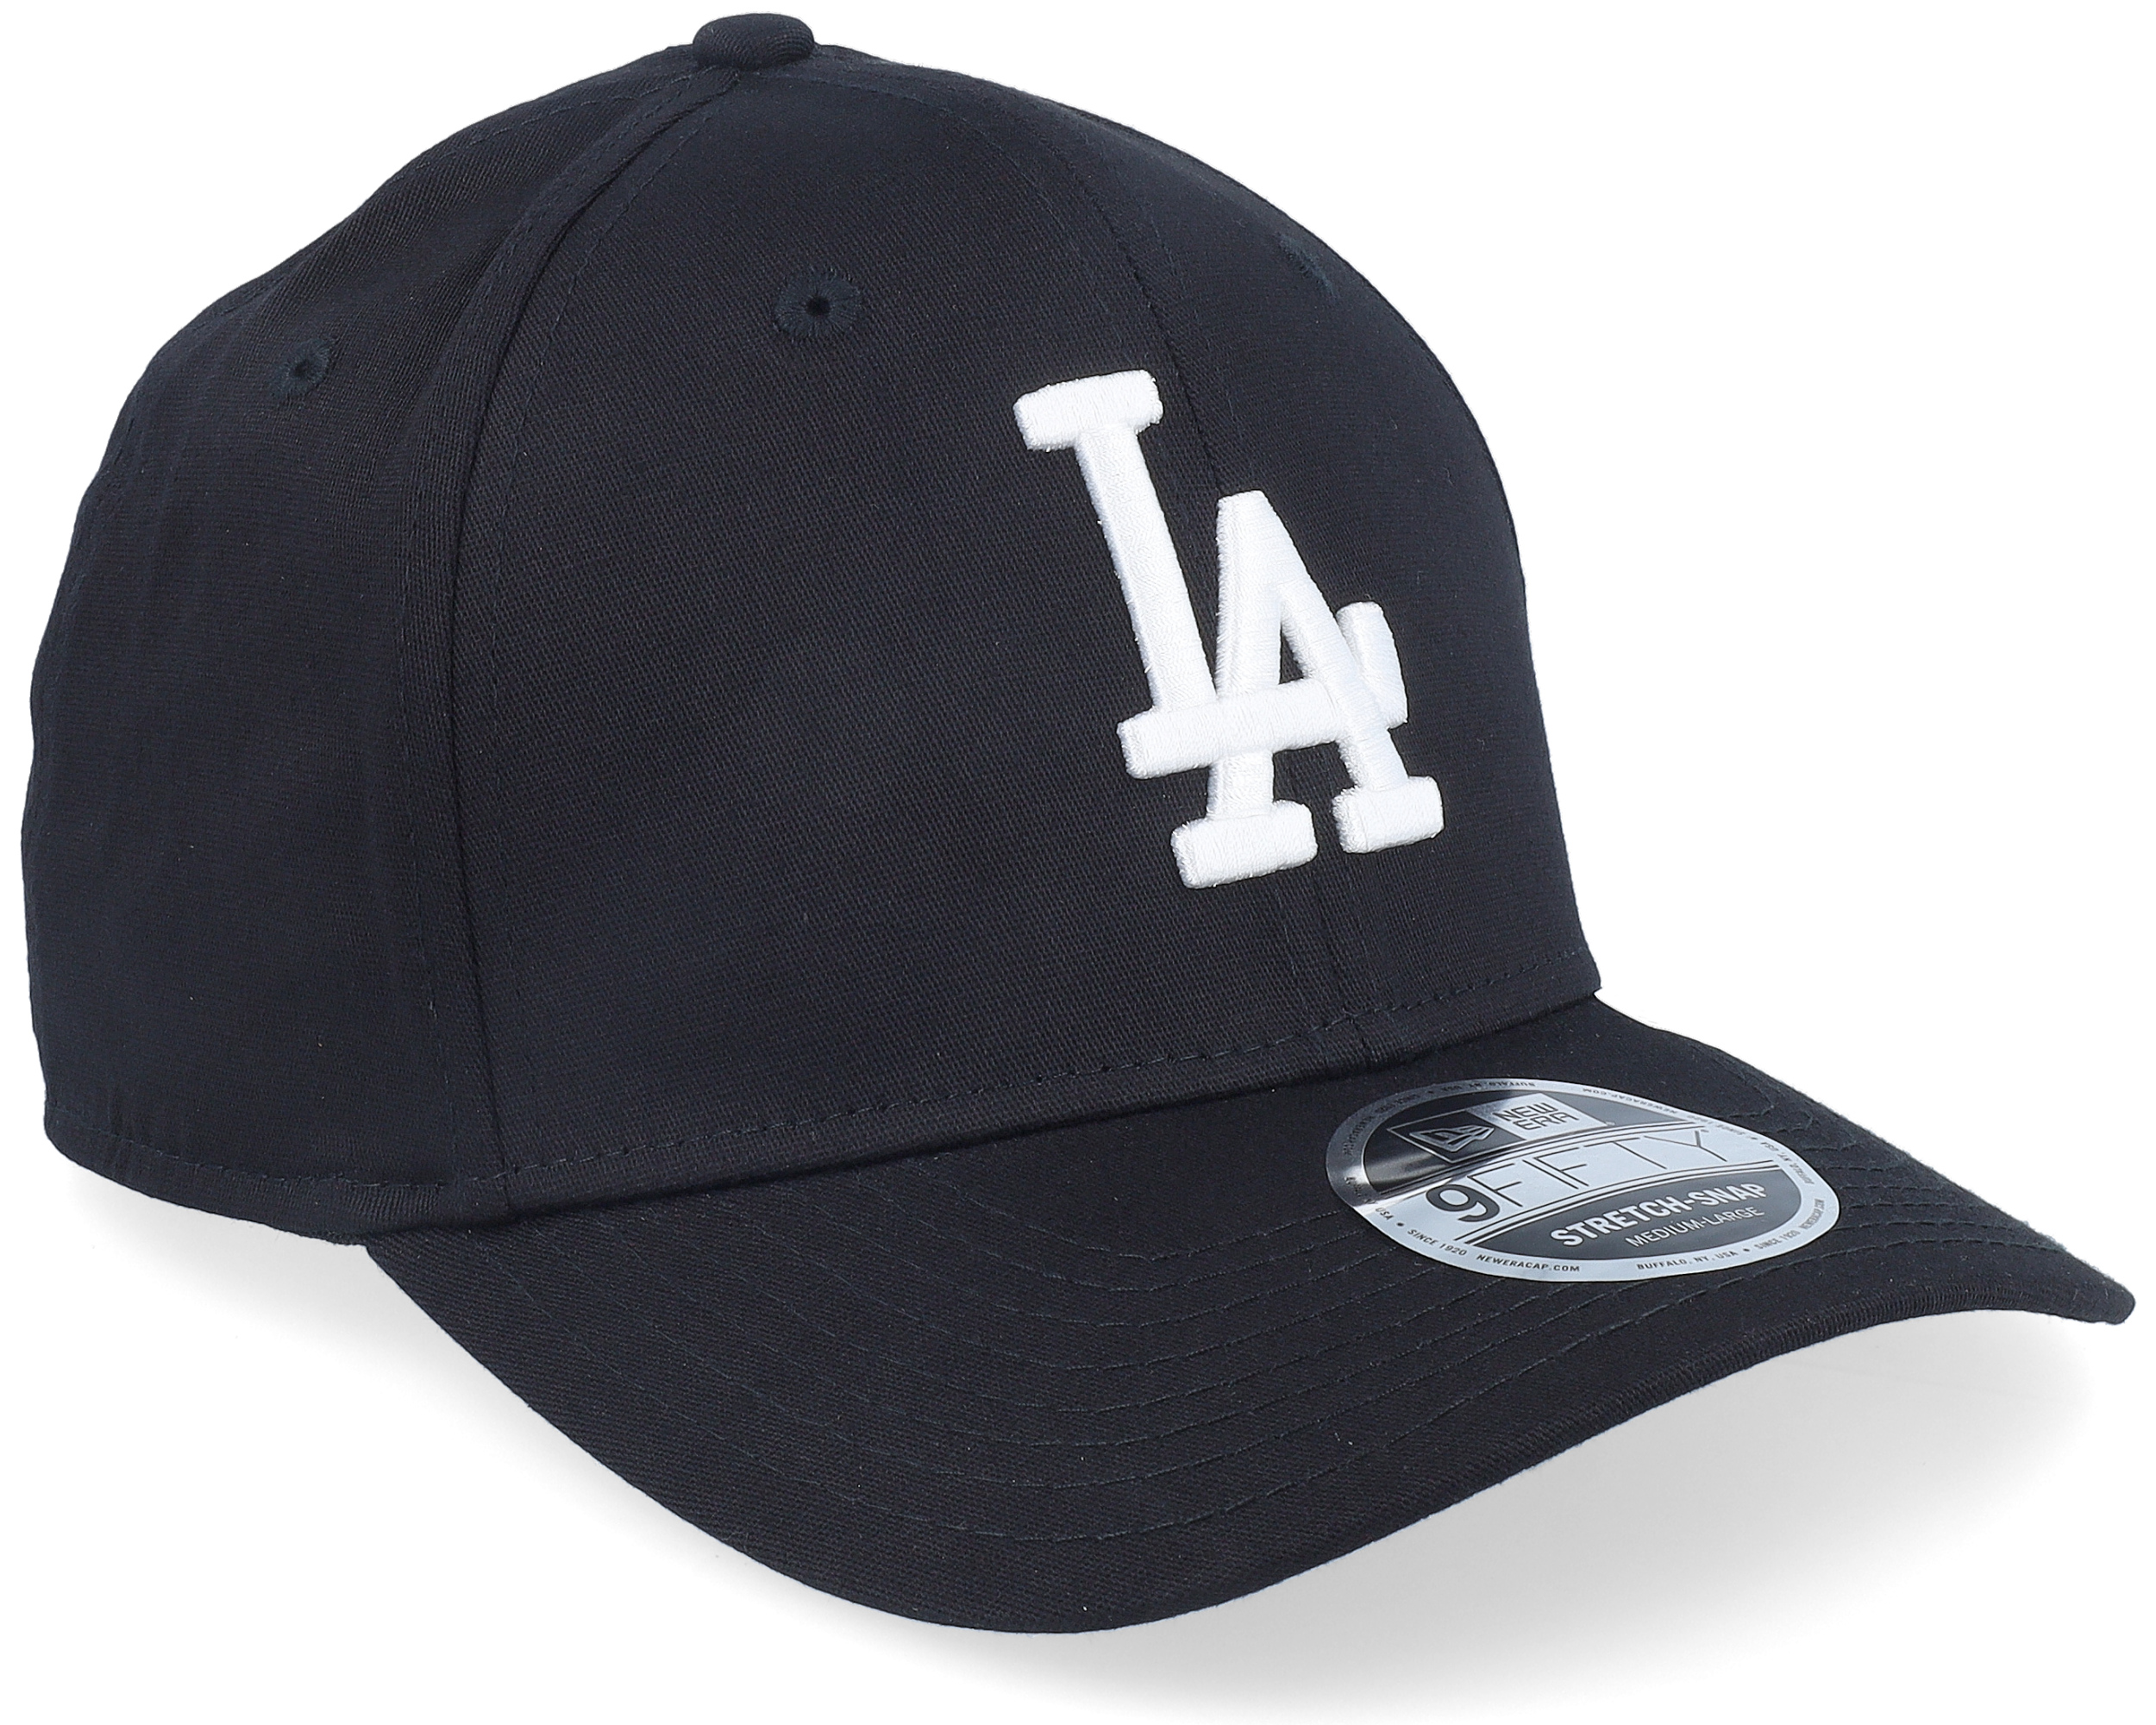 Los Angeles Dodgers 9Fifty Stretch Snap Black/White Snapback- New Era caps | Hatstore ...